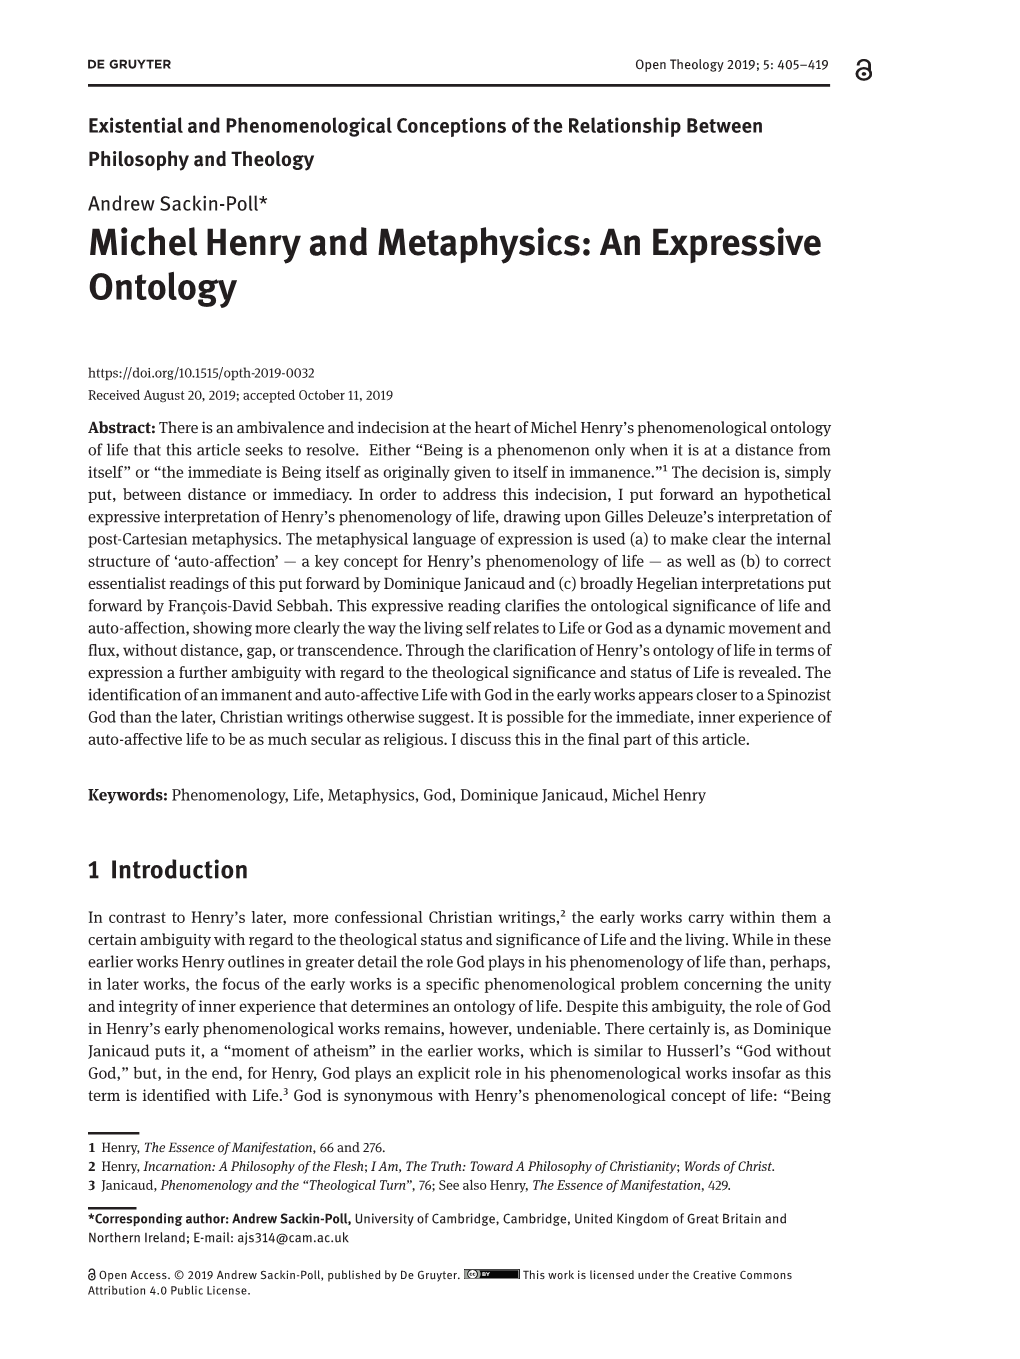 Michel Henry and Metaphysics: an Expressive Ontology